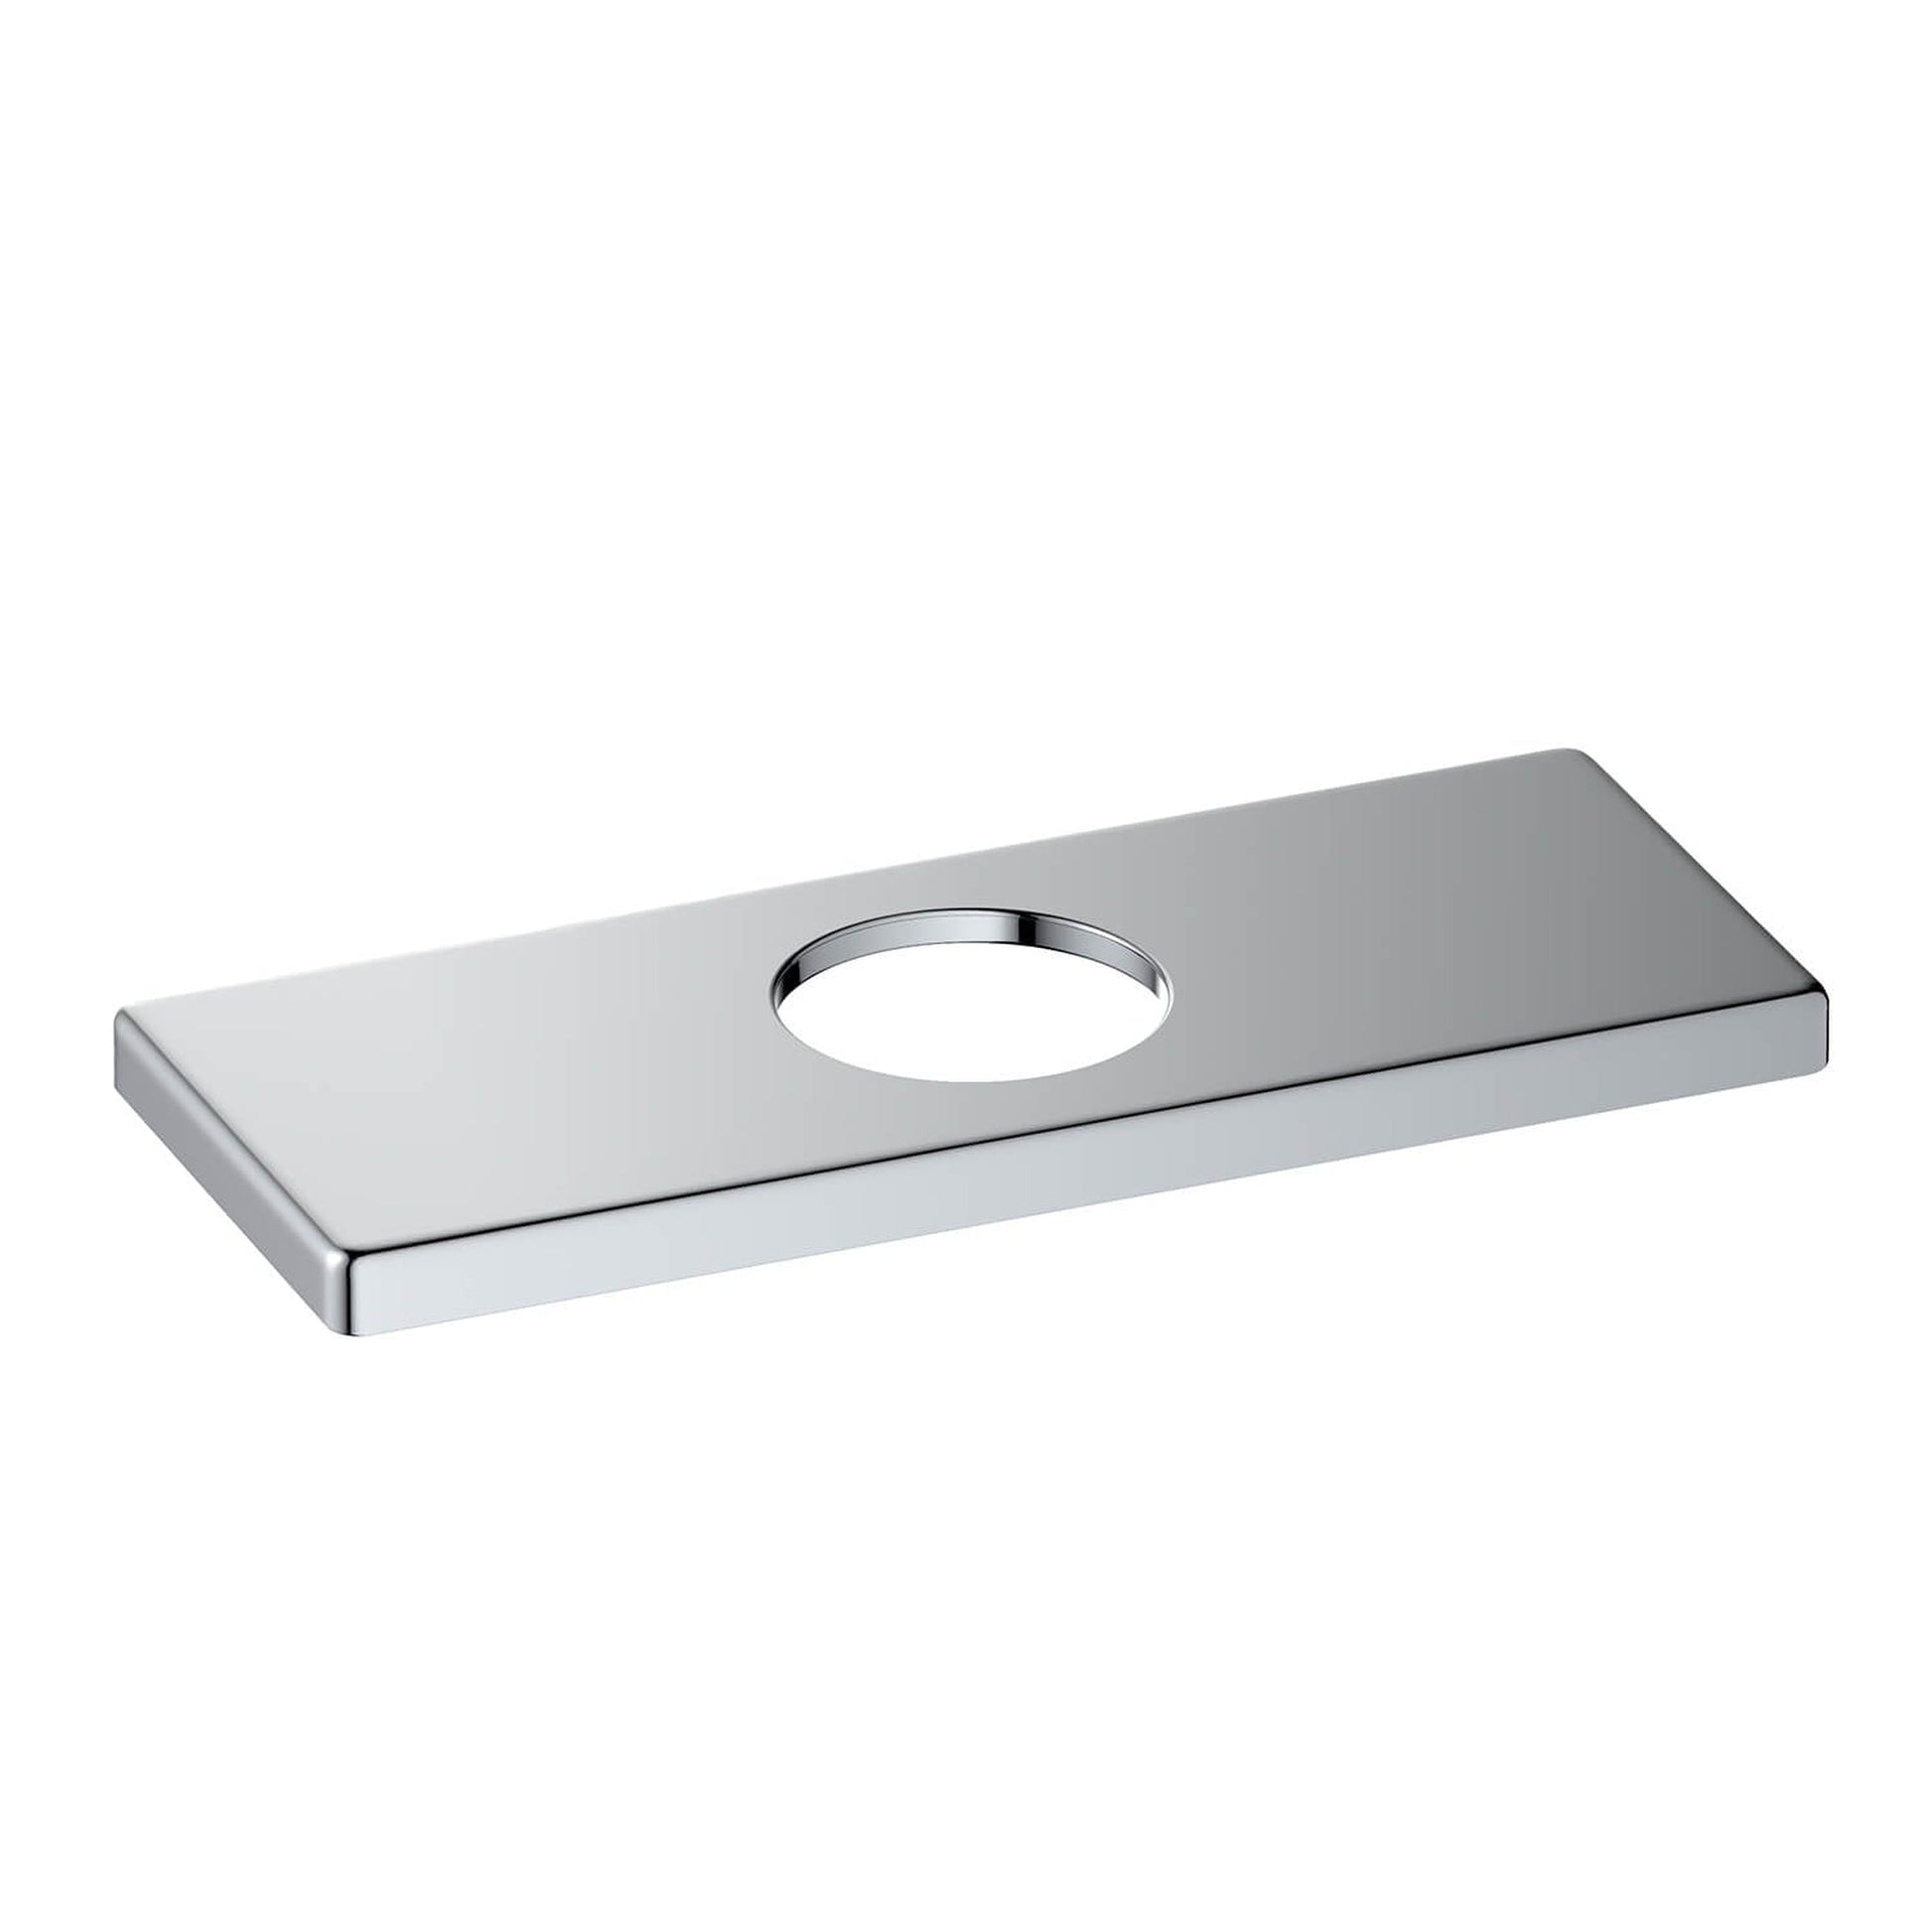 KIBI Cubic 6" Stainless Steel Faucet Hole Cover in Chrome Finish